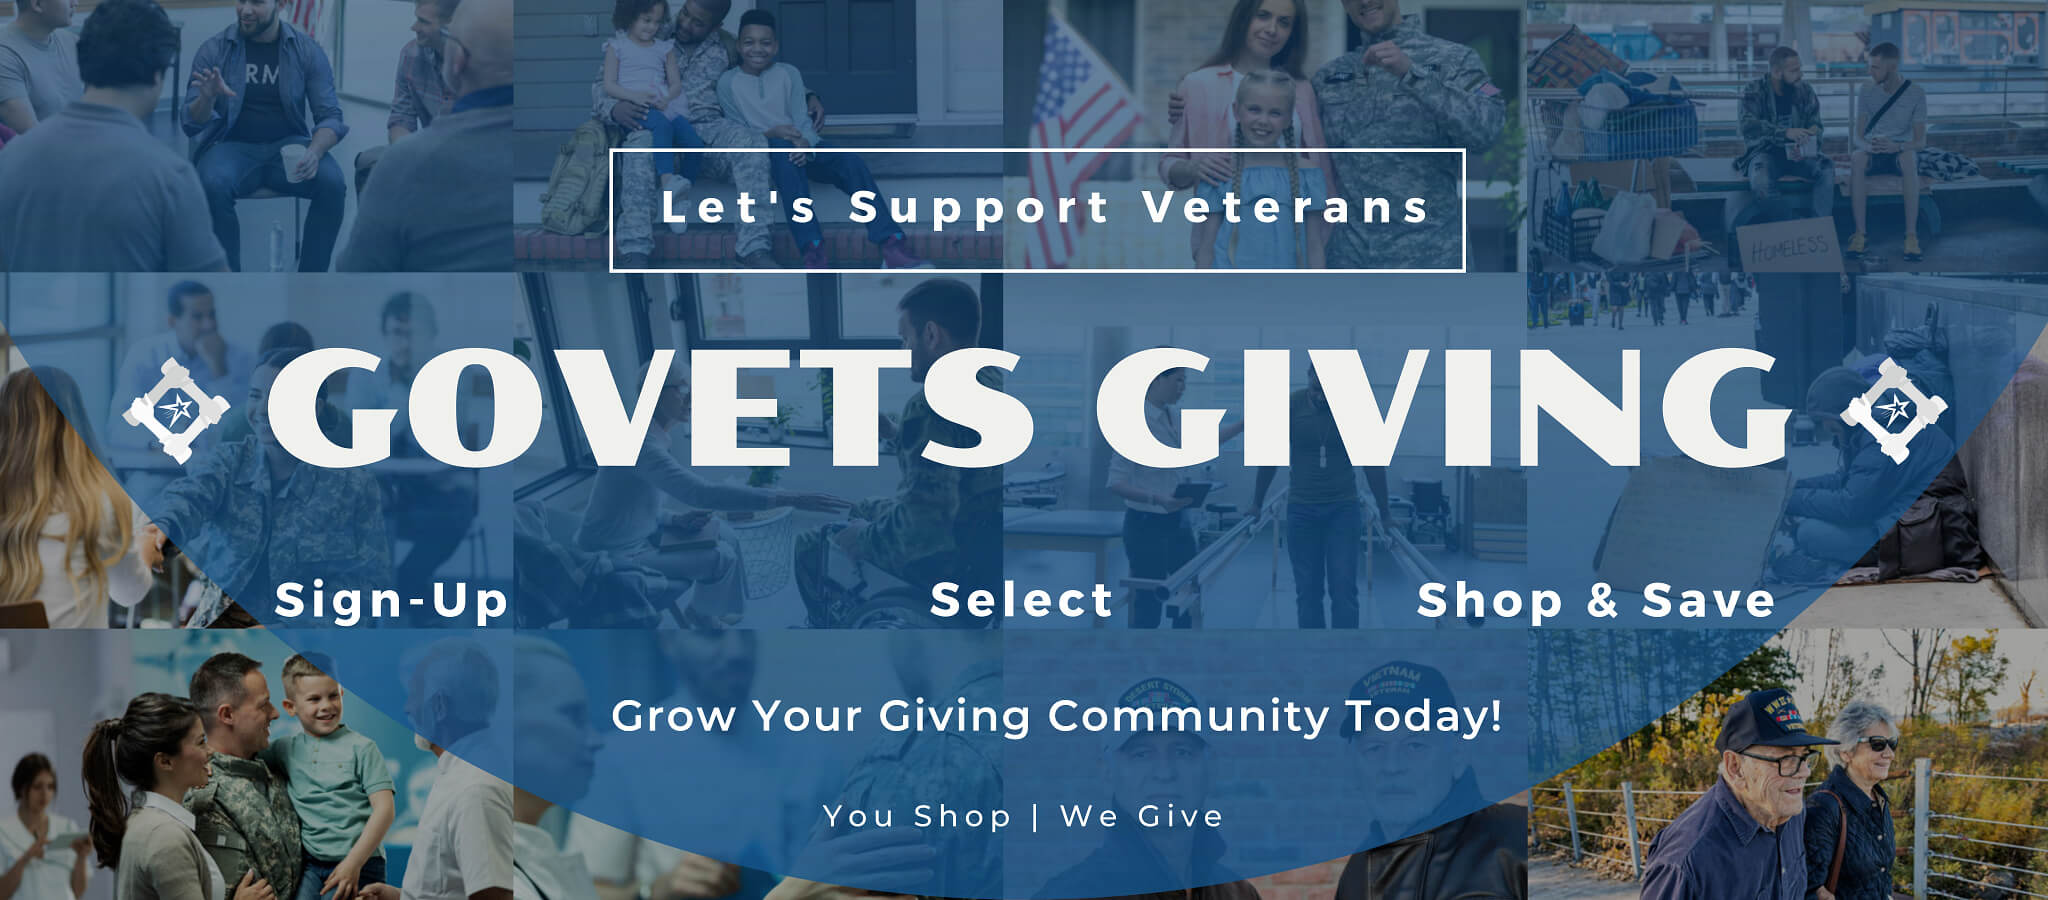 GoVets Giving - You Shop | We Give